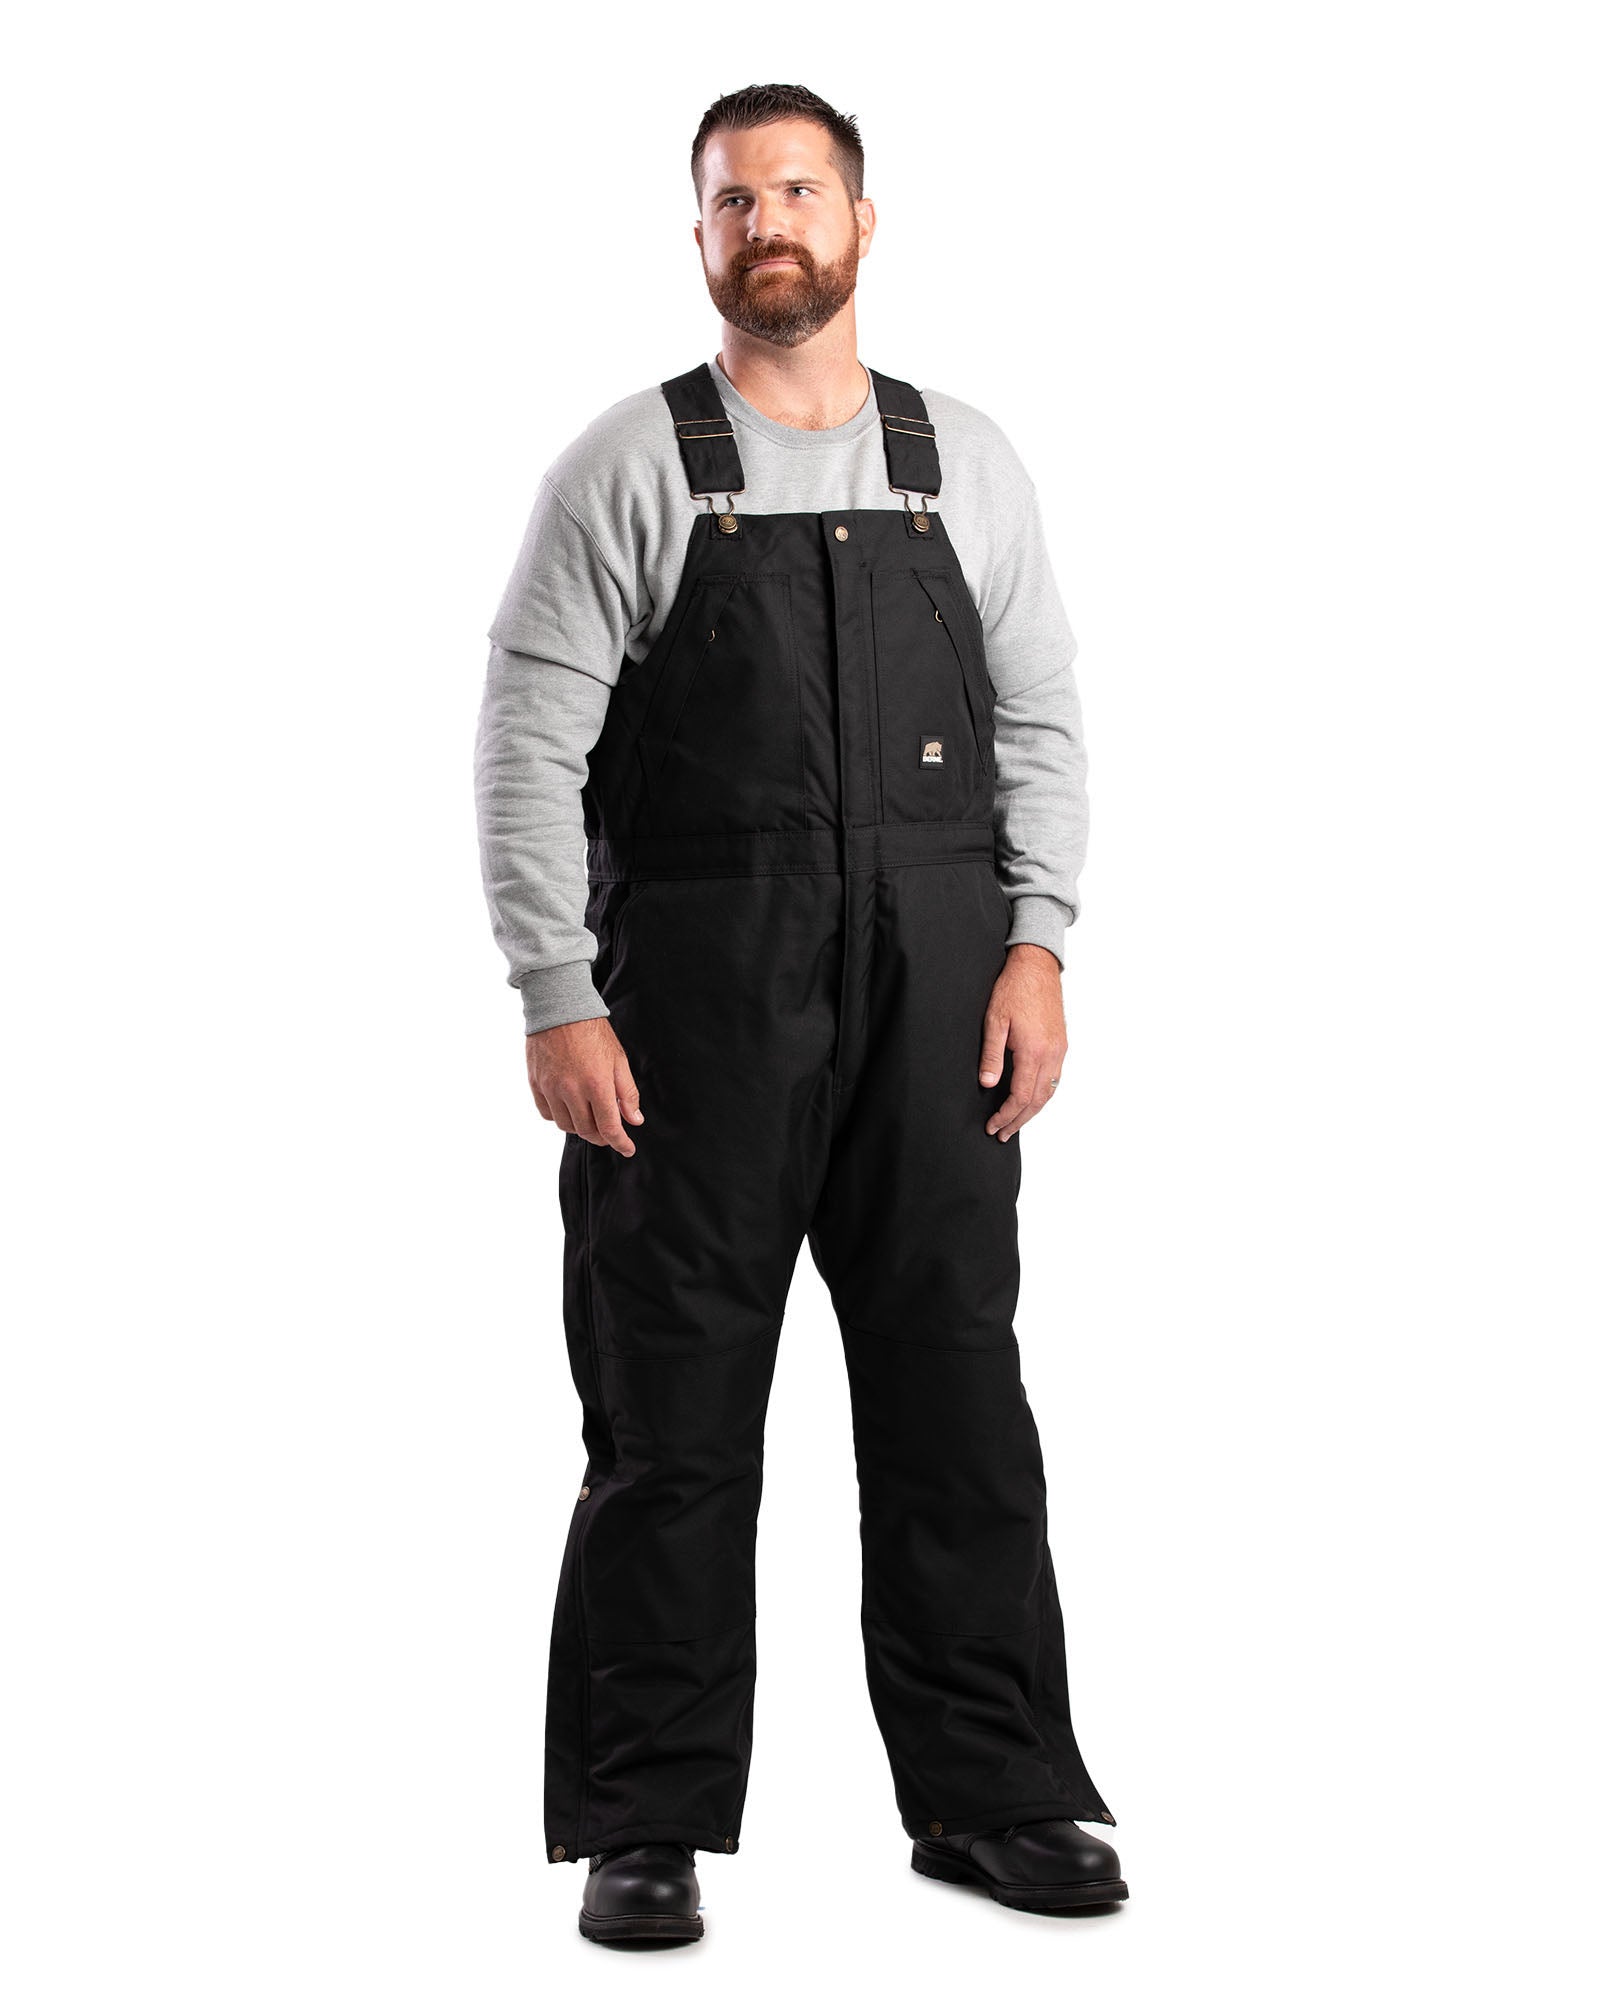 Waterproof Coveralls  Water Repellant Jumpsuits — Safety Vests and More